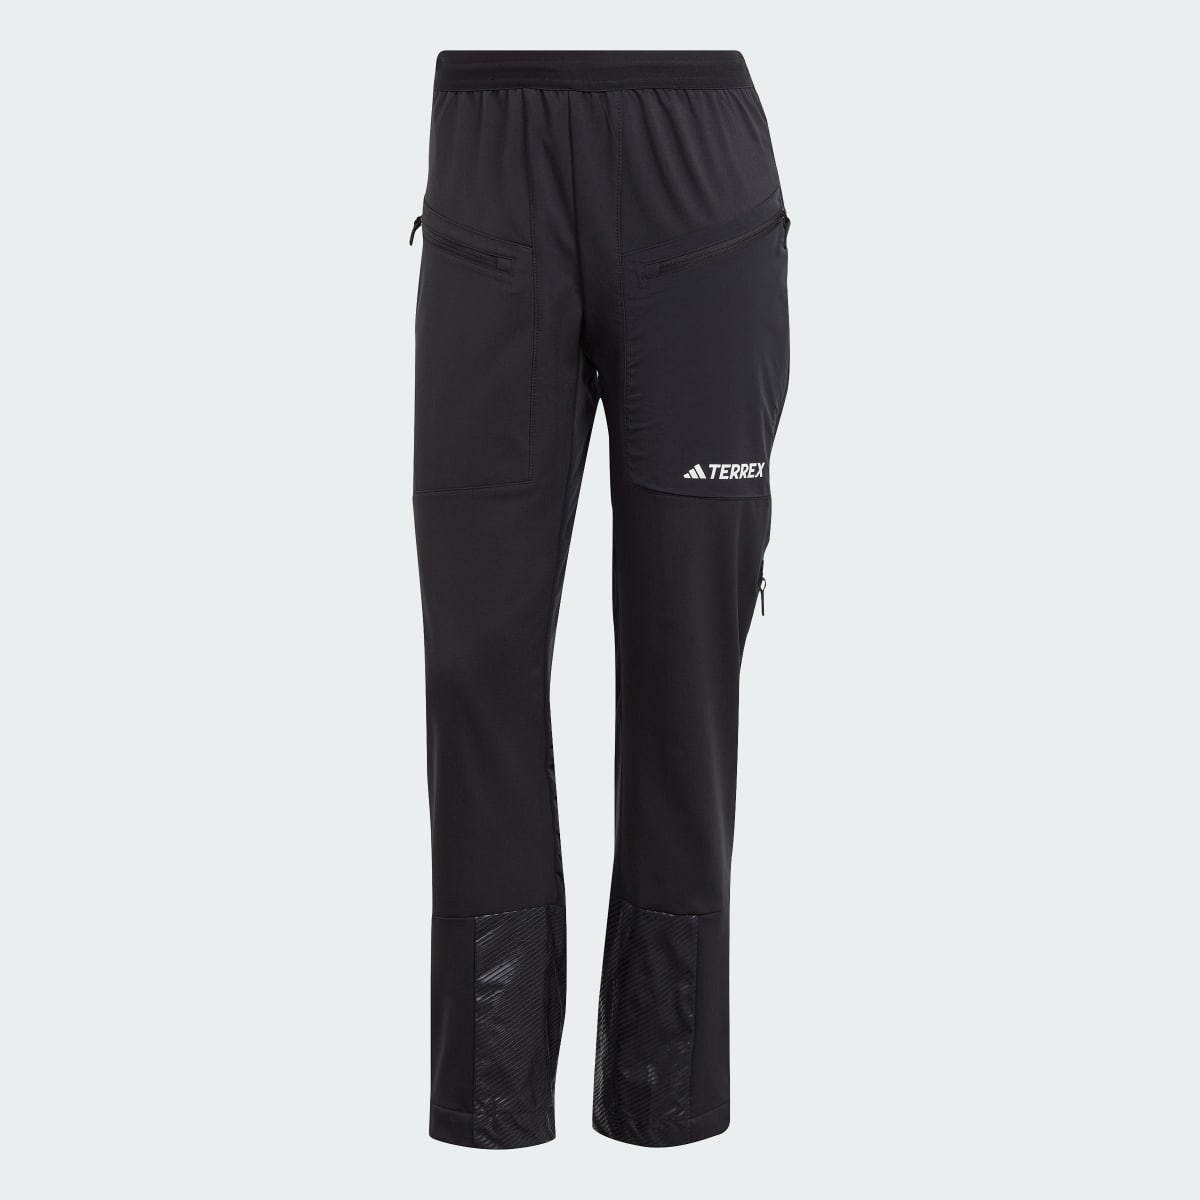 Adidas Terrex Xperior Fast Tracksuit Bottoms. 4